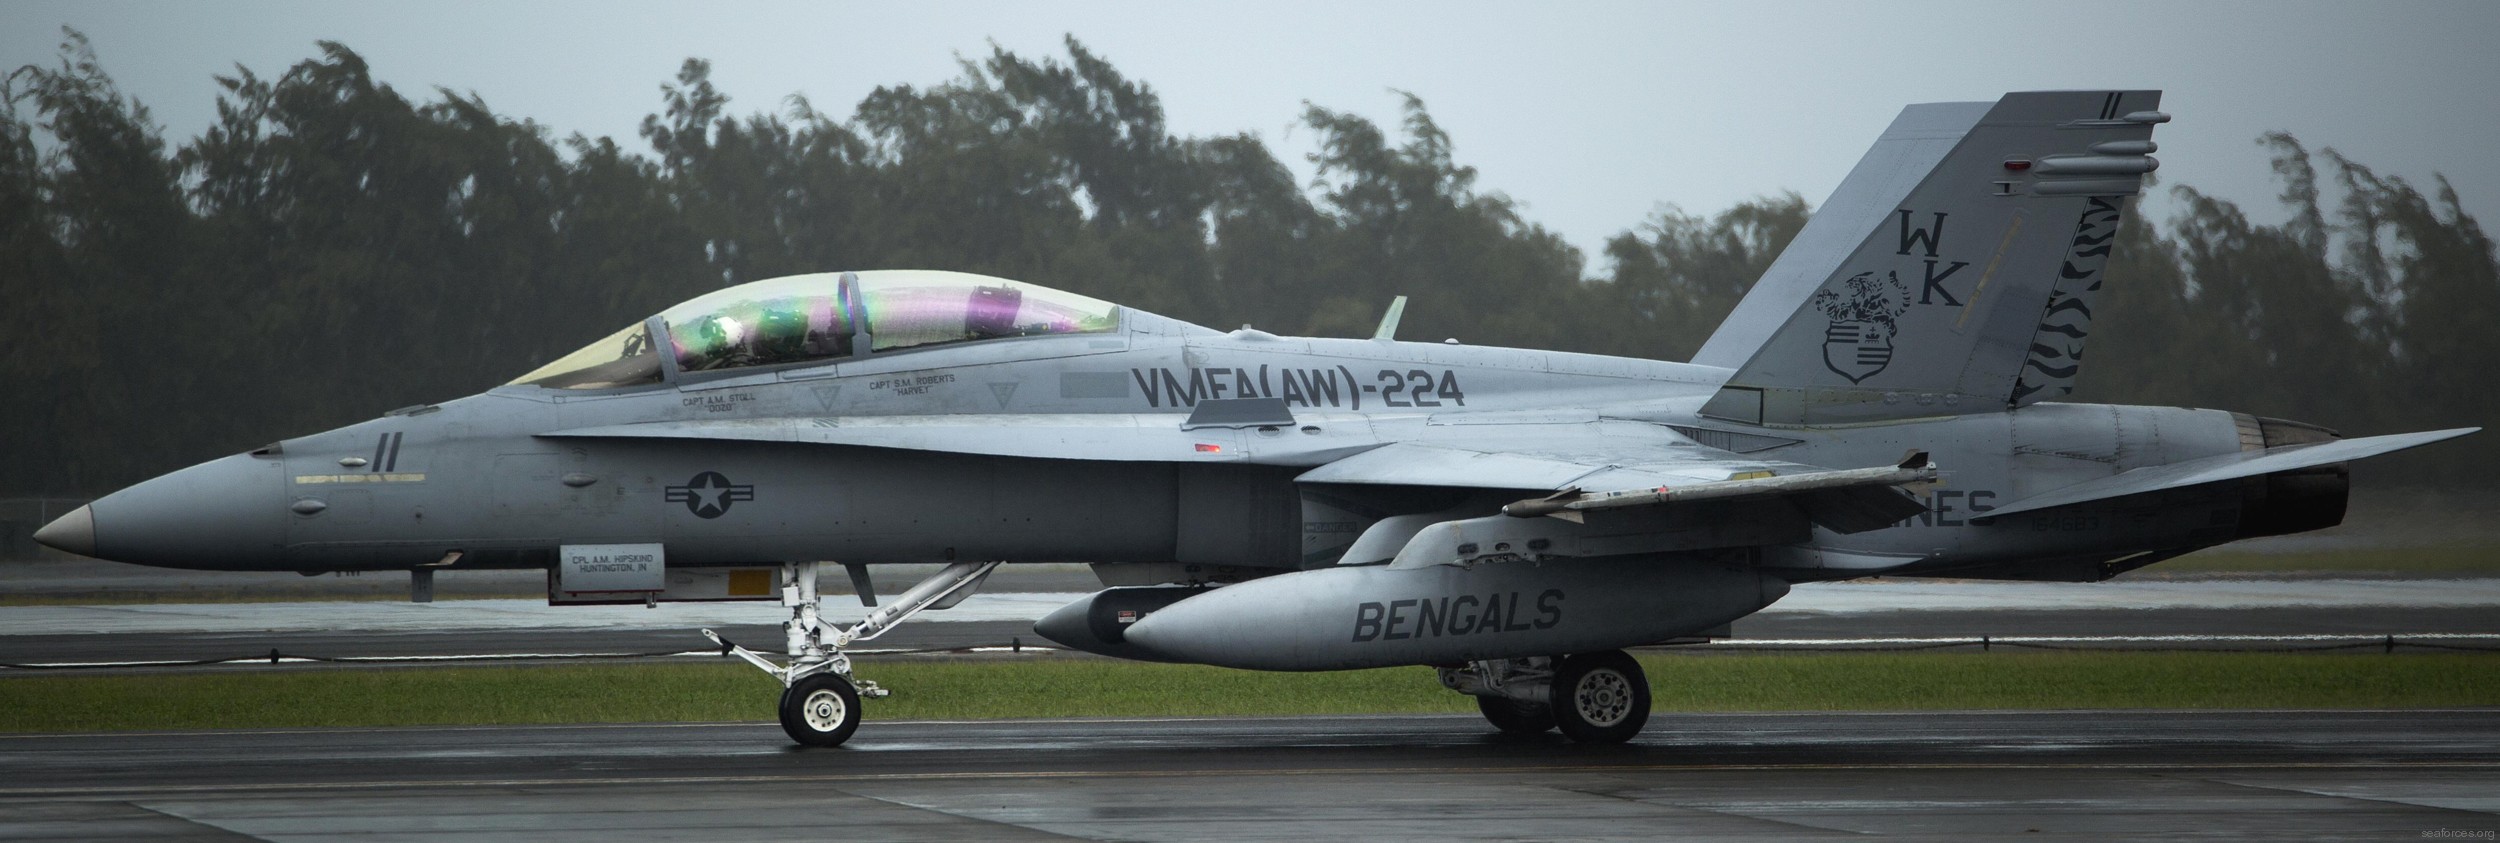 vmfa(aw)-224 bengals marine fighter attack squadron usmc f/a-18d hornet 17a